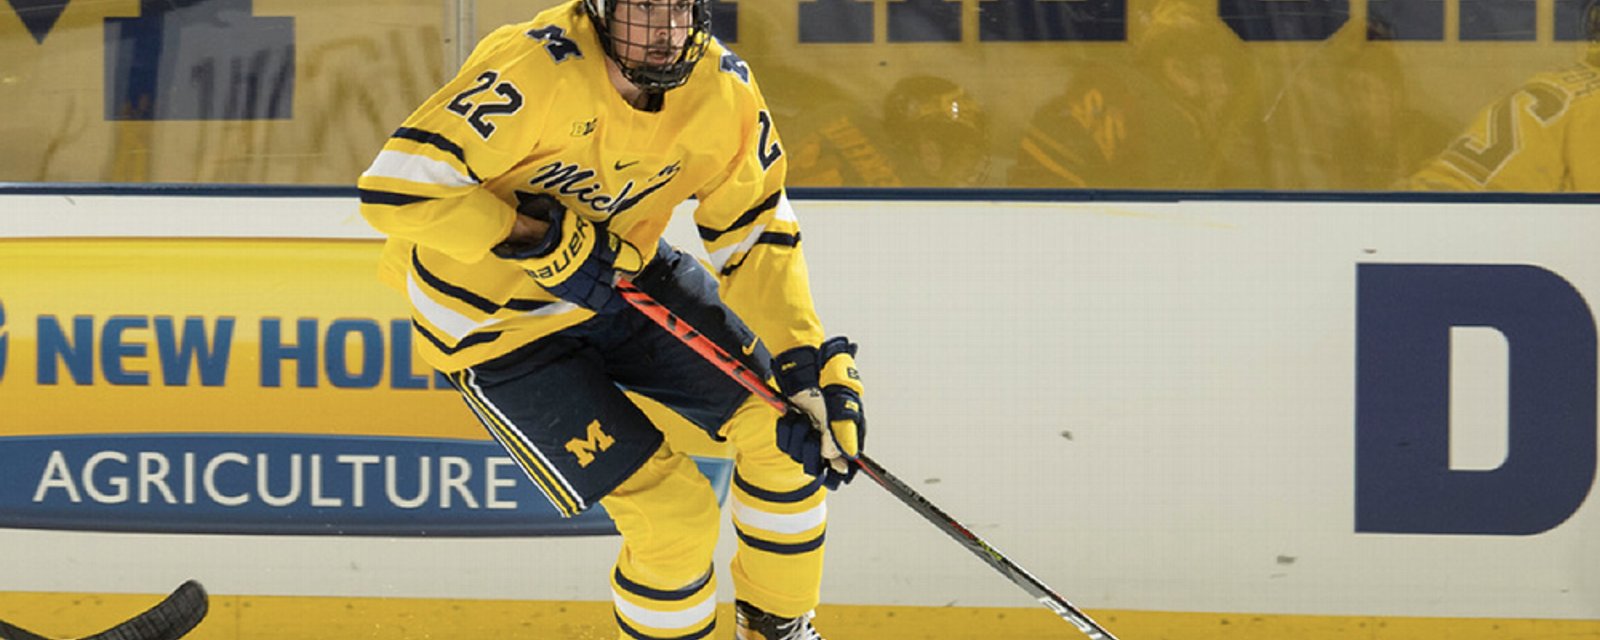 No. 1 NHL Draft selection Owen Power told the Sabres of his intentions in July 